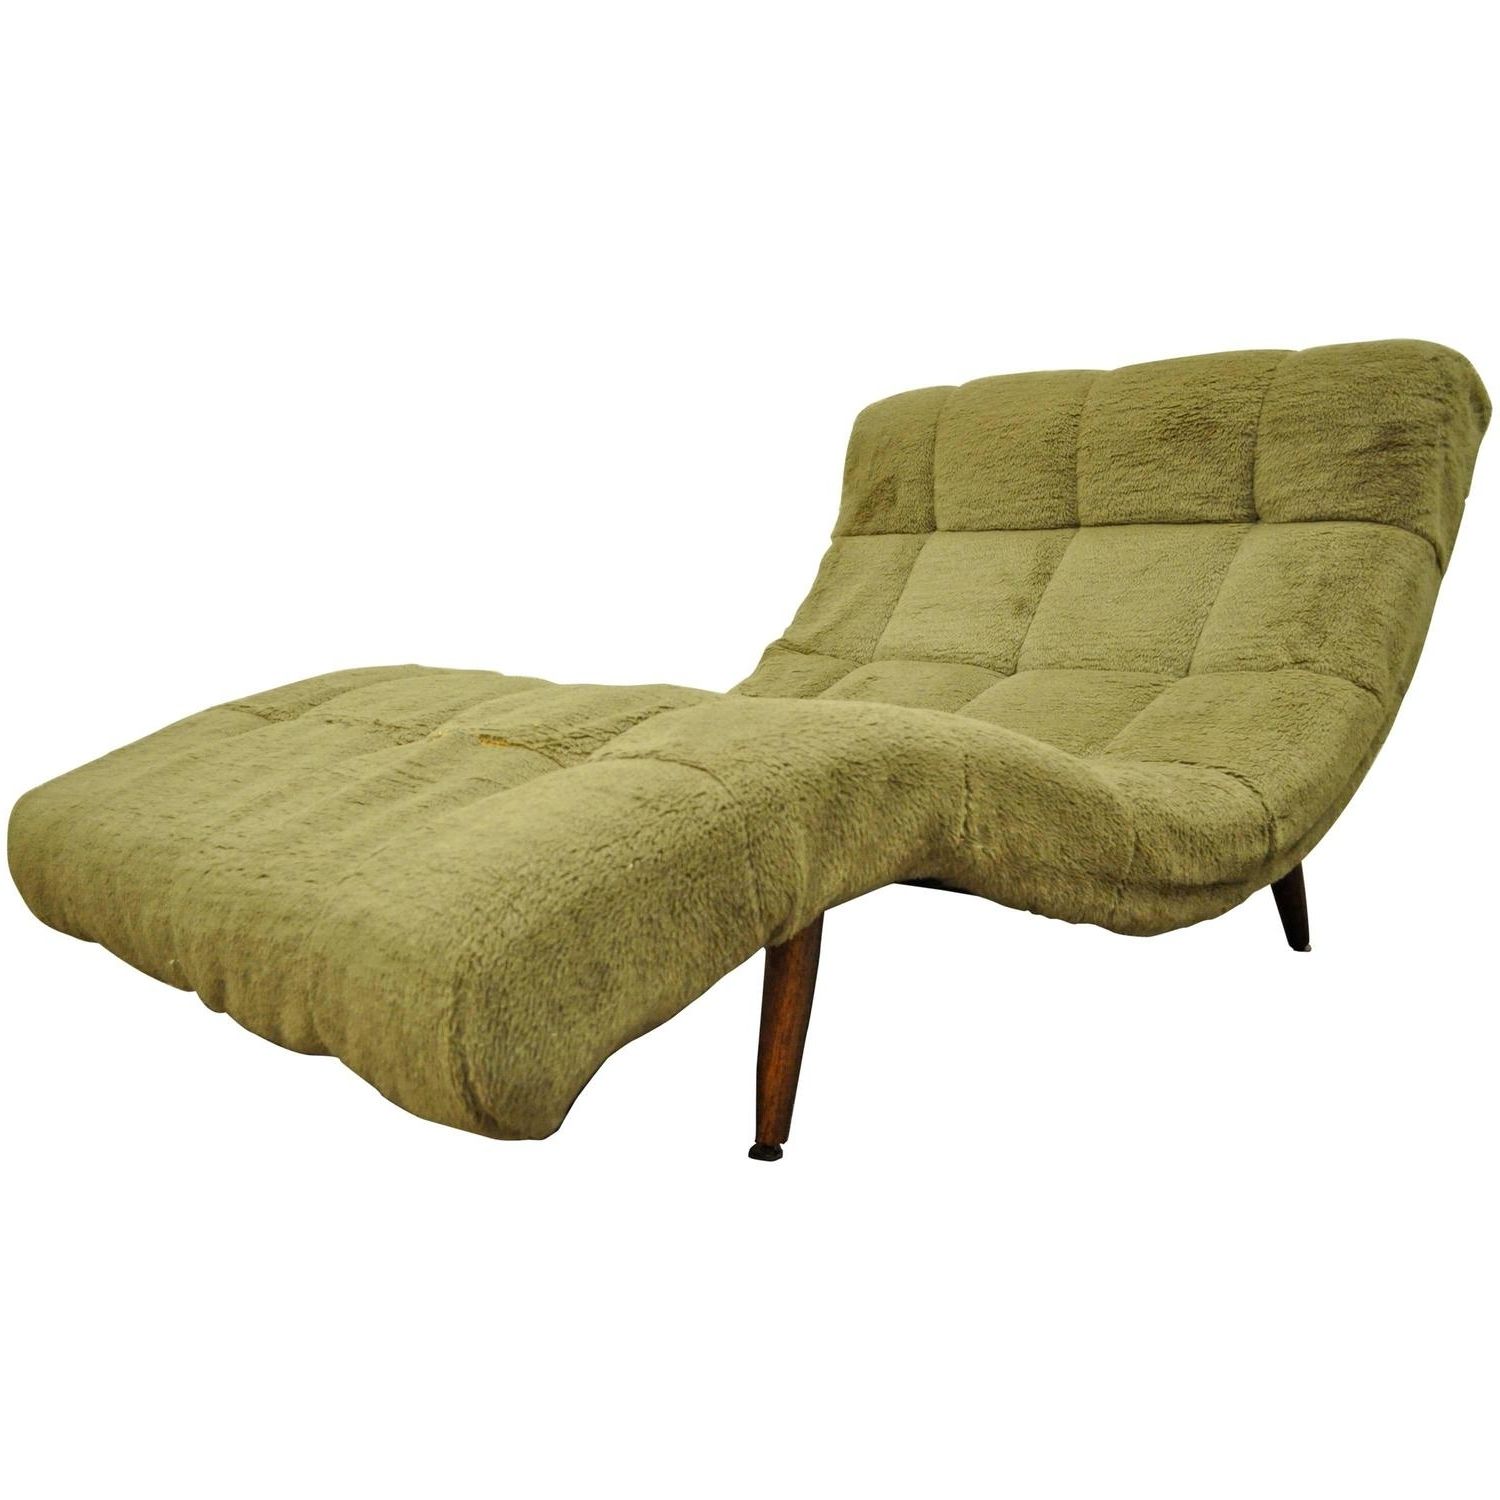 Curved Chaise Lounges In Most Popular Midcentury Curved Chaise Lounge Chair Attributed To Adrian (View 8 of 15)